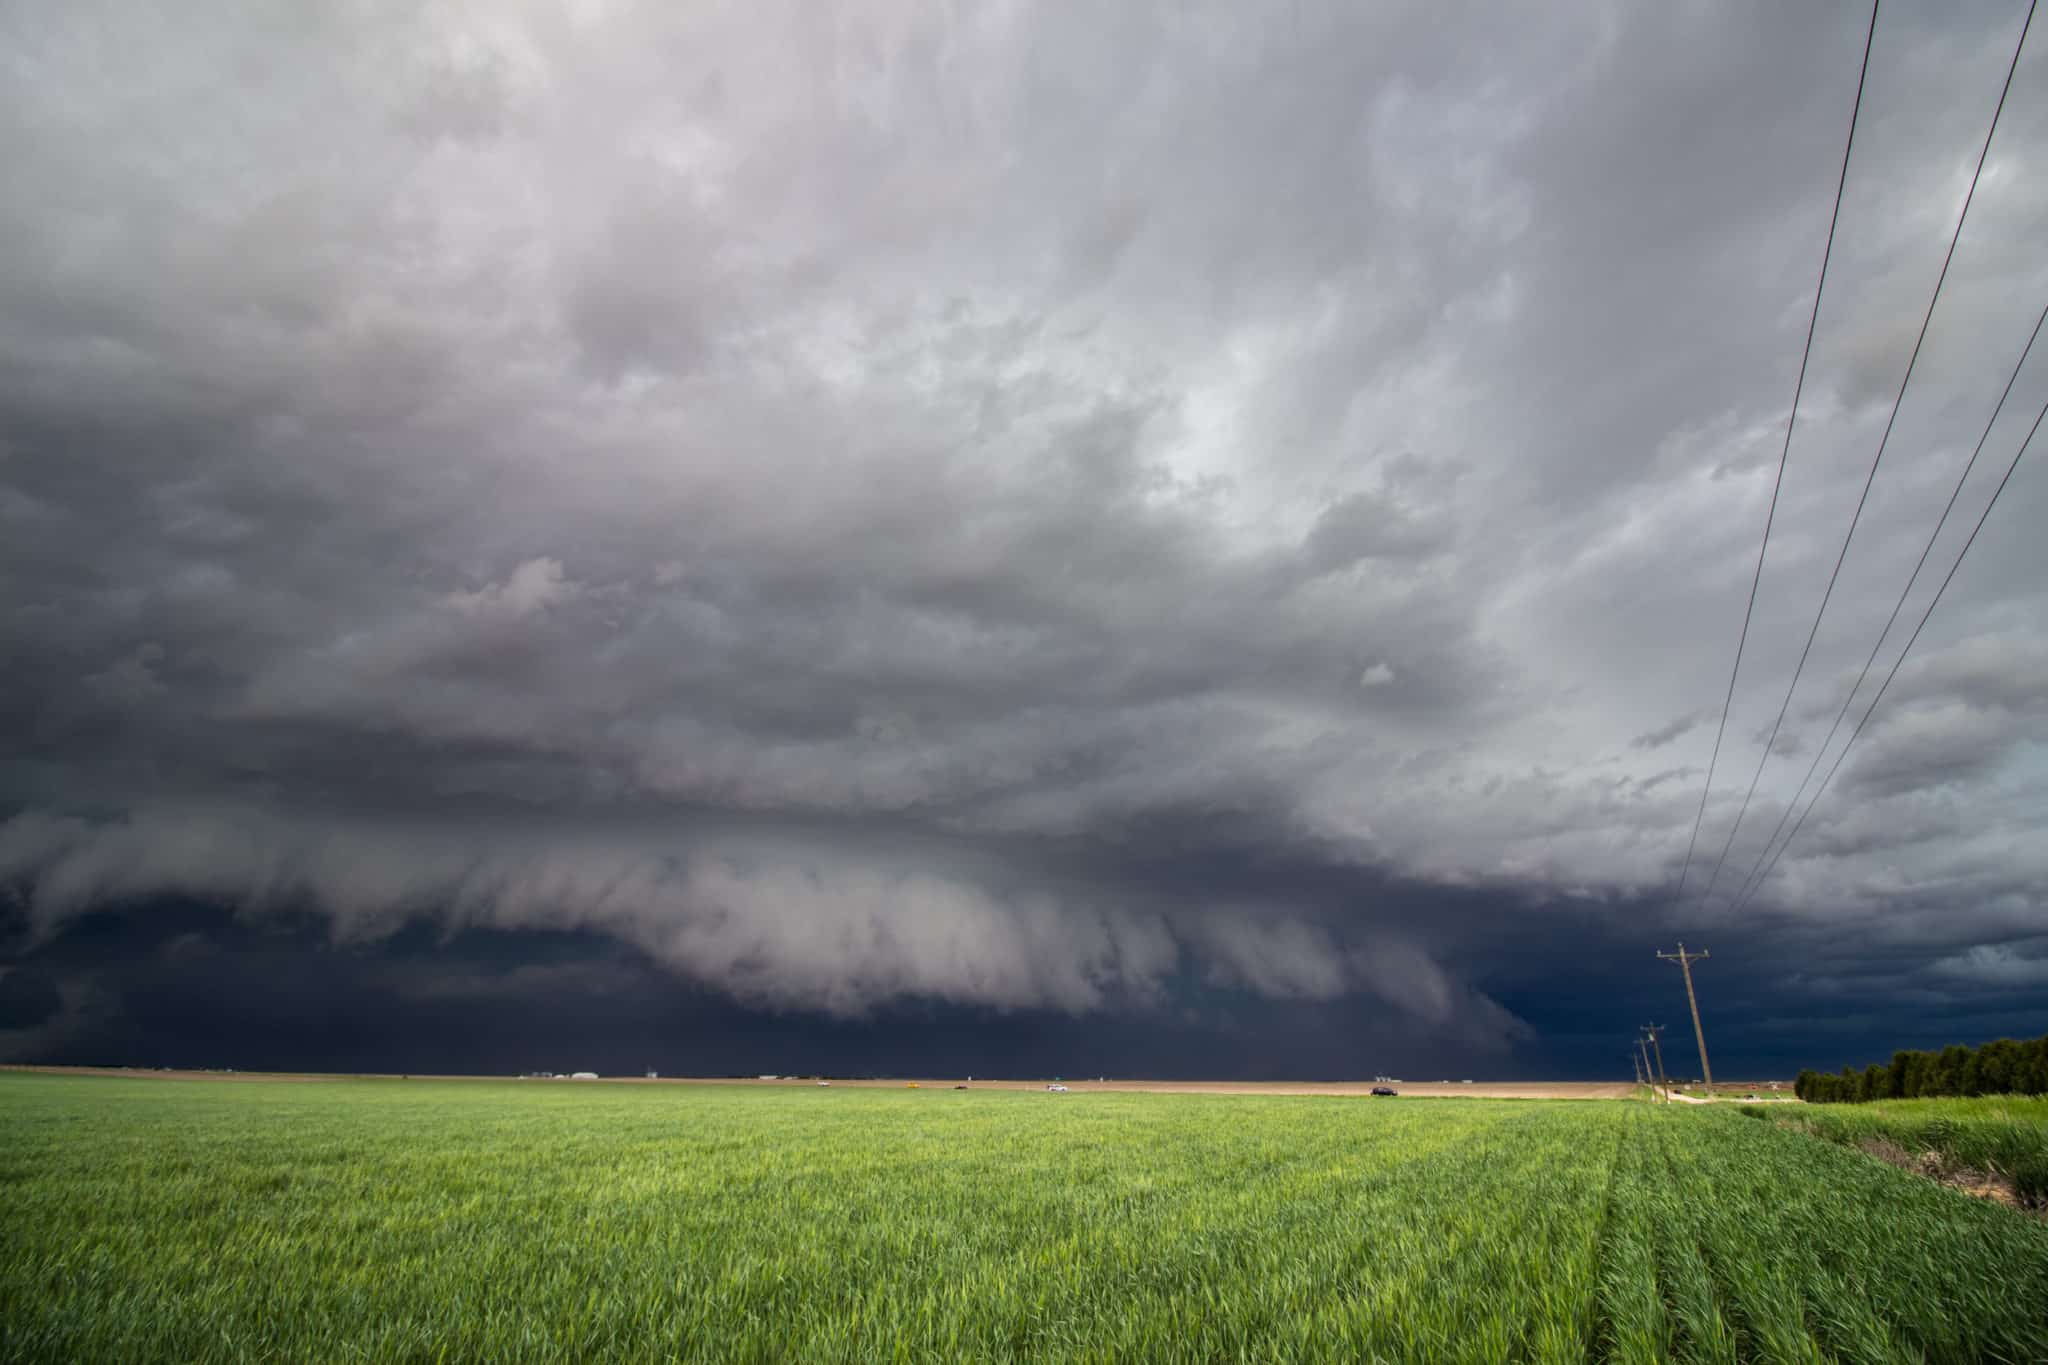 A low shelf cloud and severe storm rapidly approaches over farm country